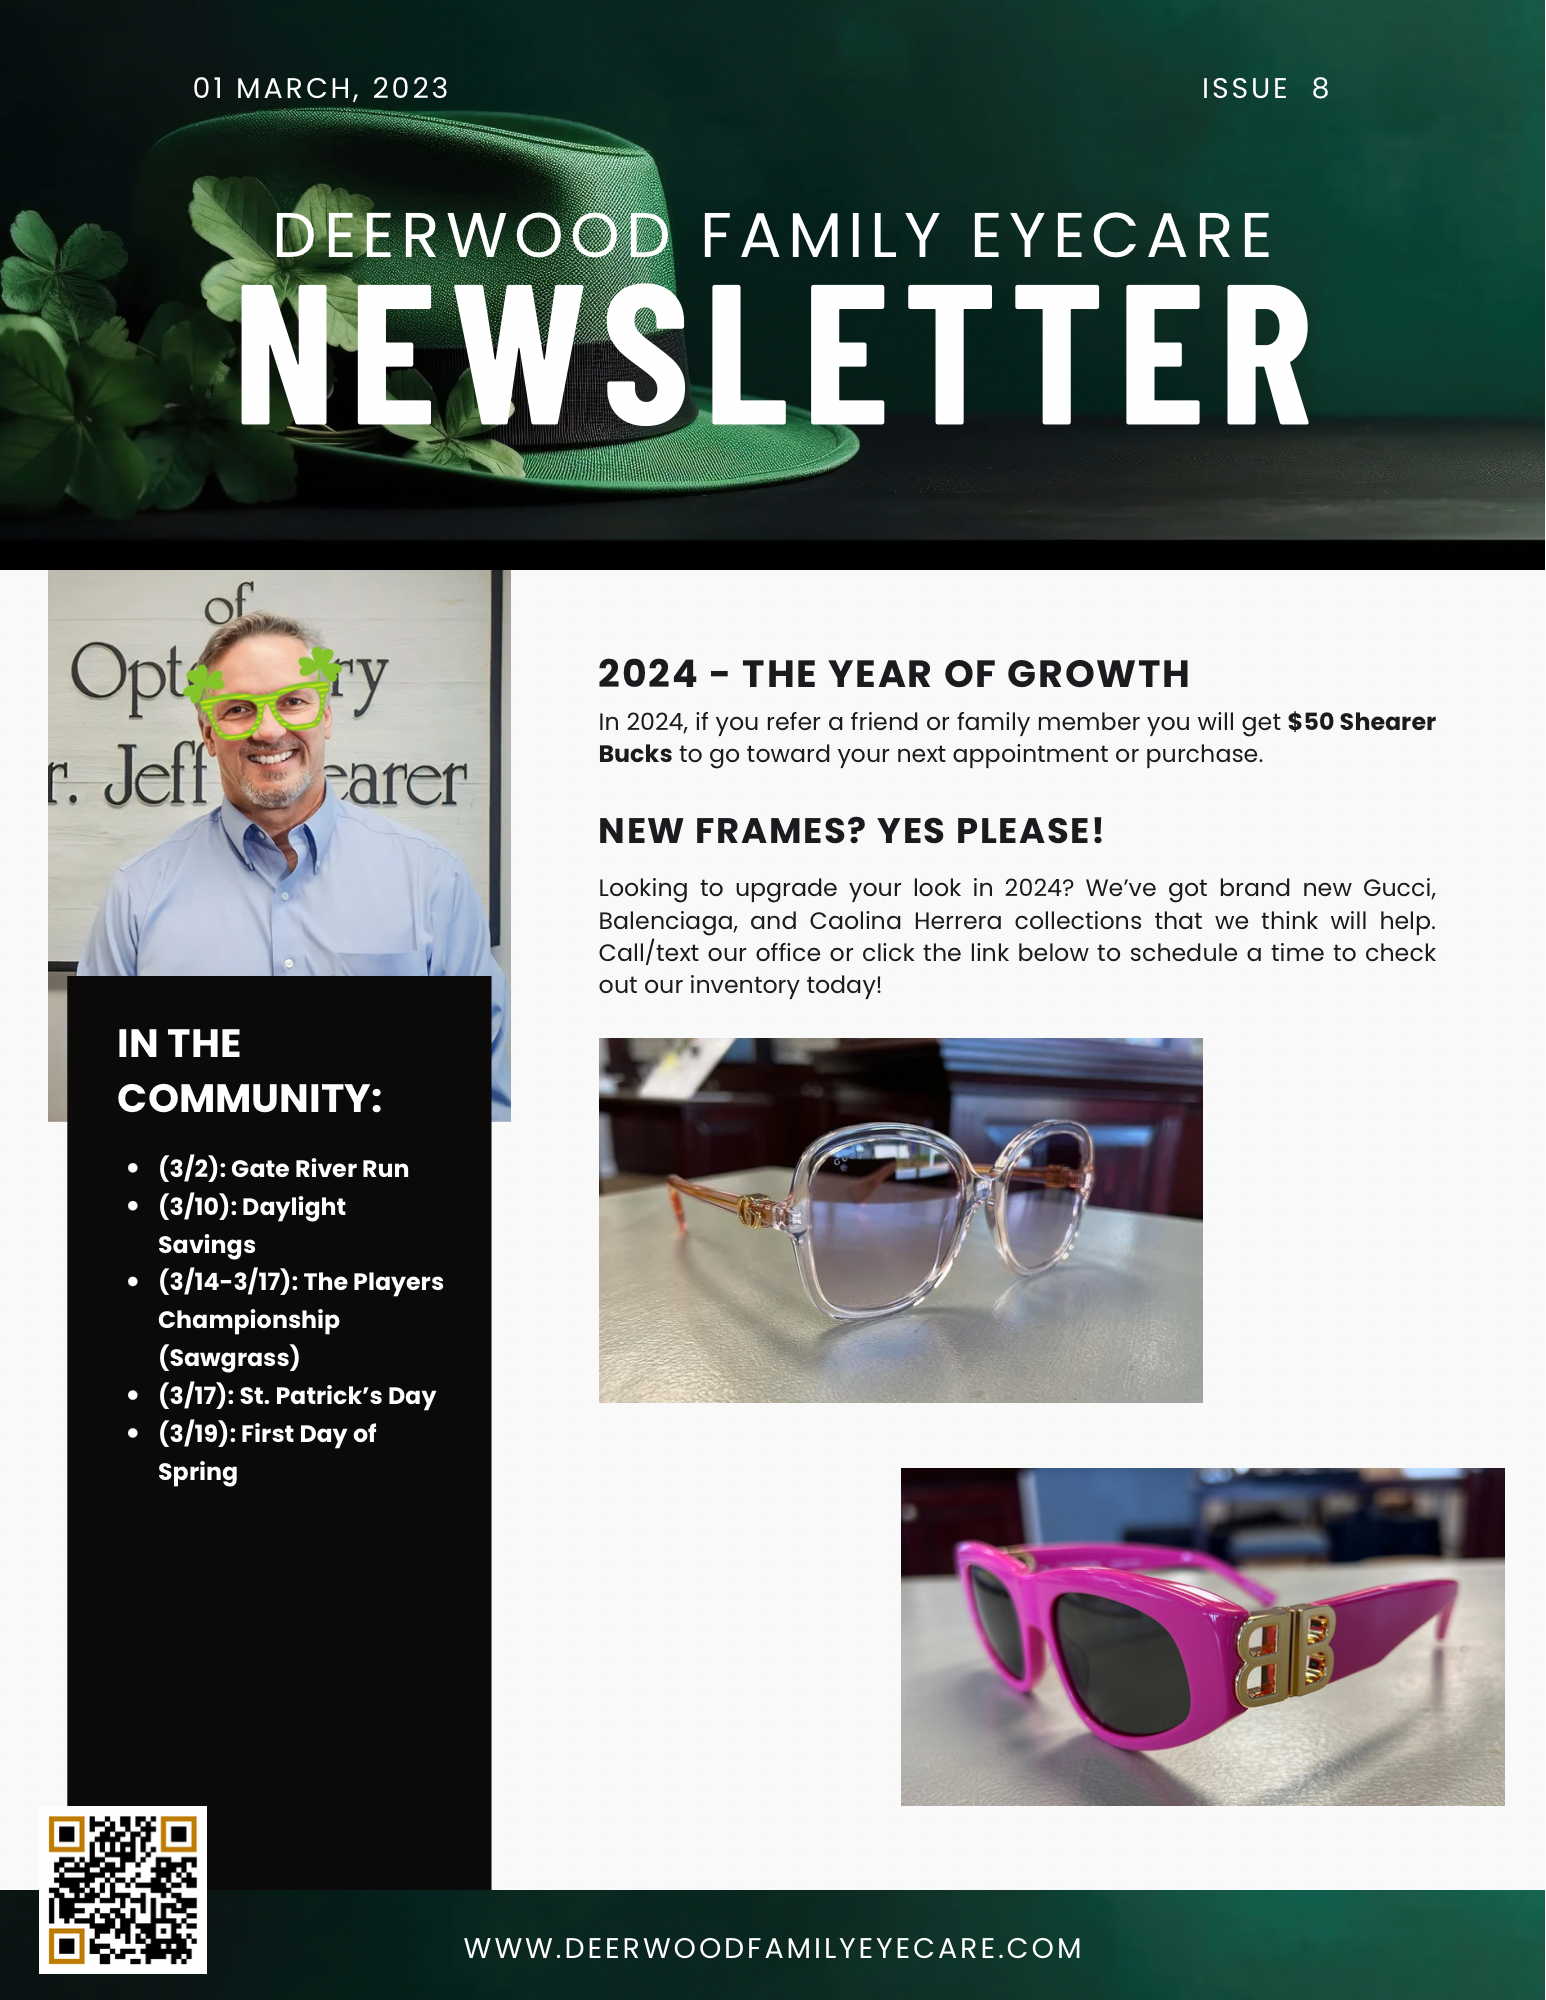 Deerwood Family Eyecare | New and Exciting